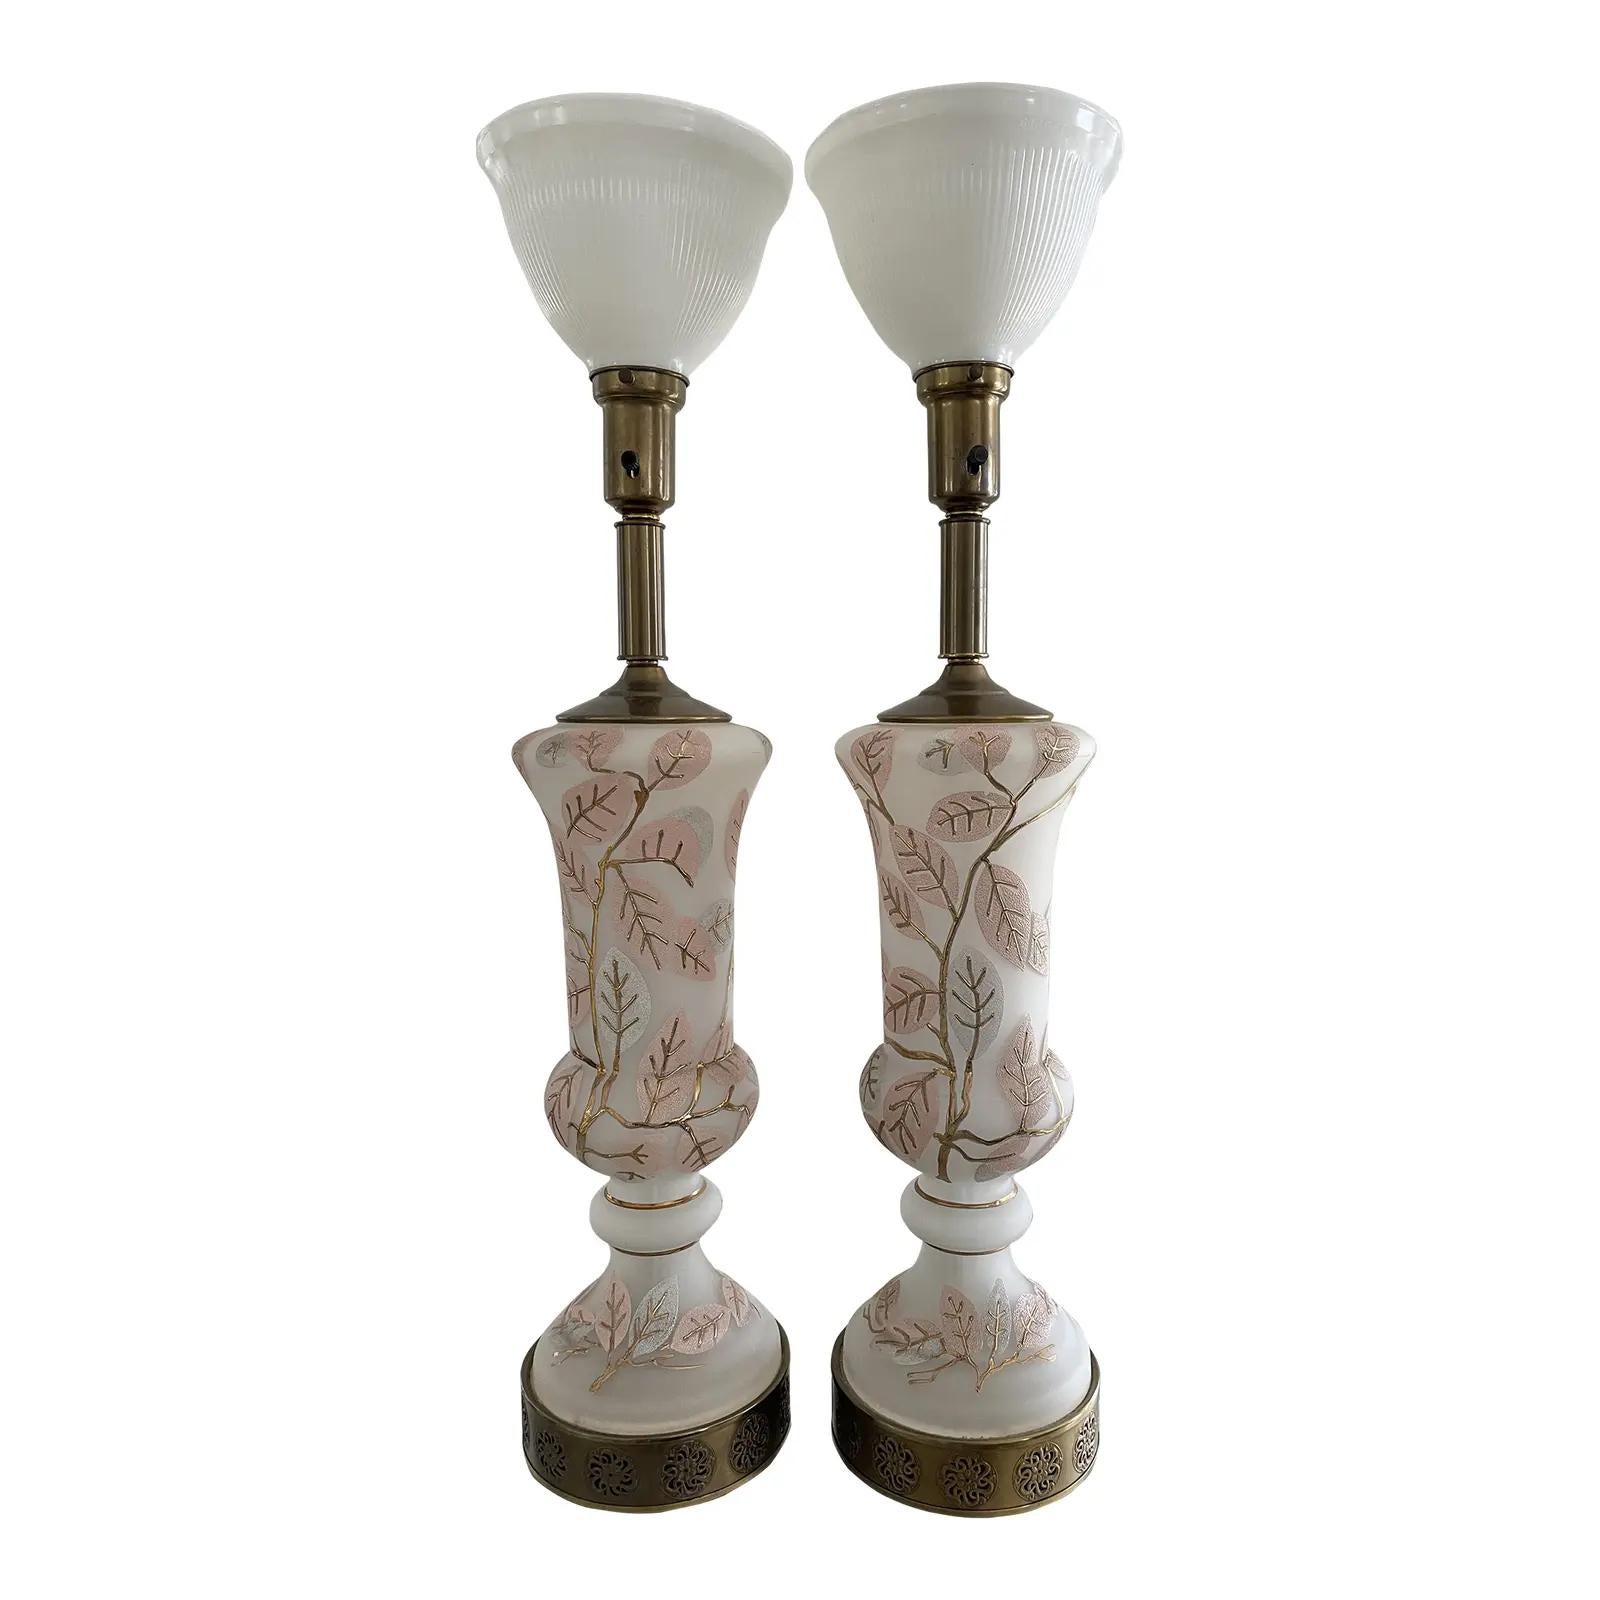  Hollywood Regency Urn Lamps - a Pair In Good Condition For Sale In W Allenhurst, NJ